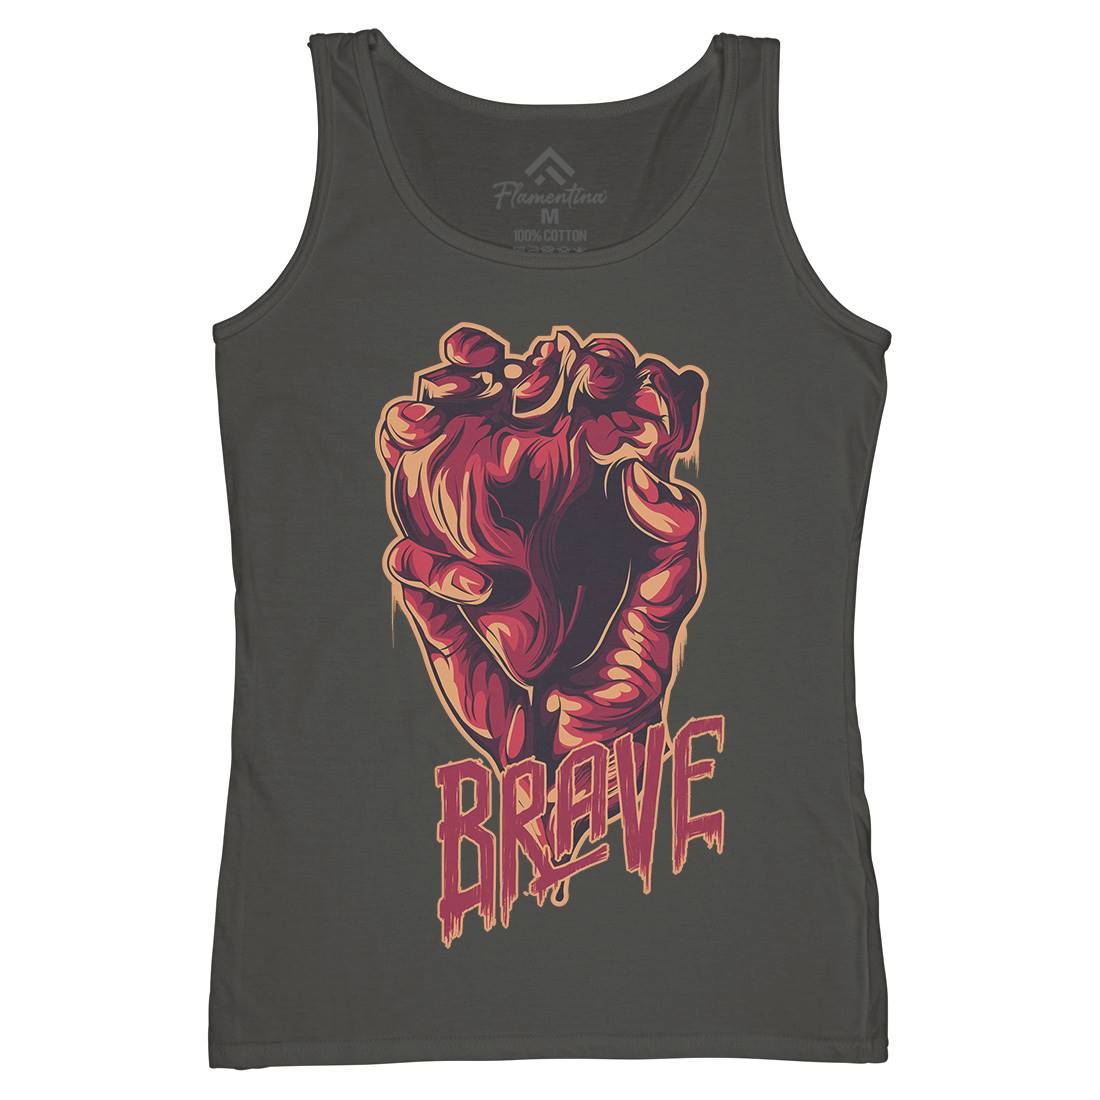 Heart Brave Womens Organic Tank Top Vest Quotes B000